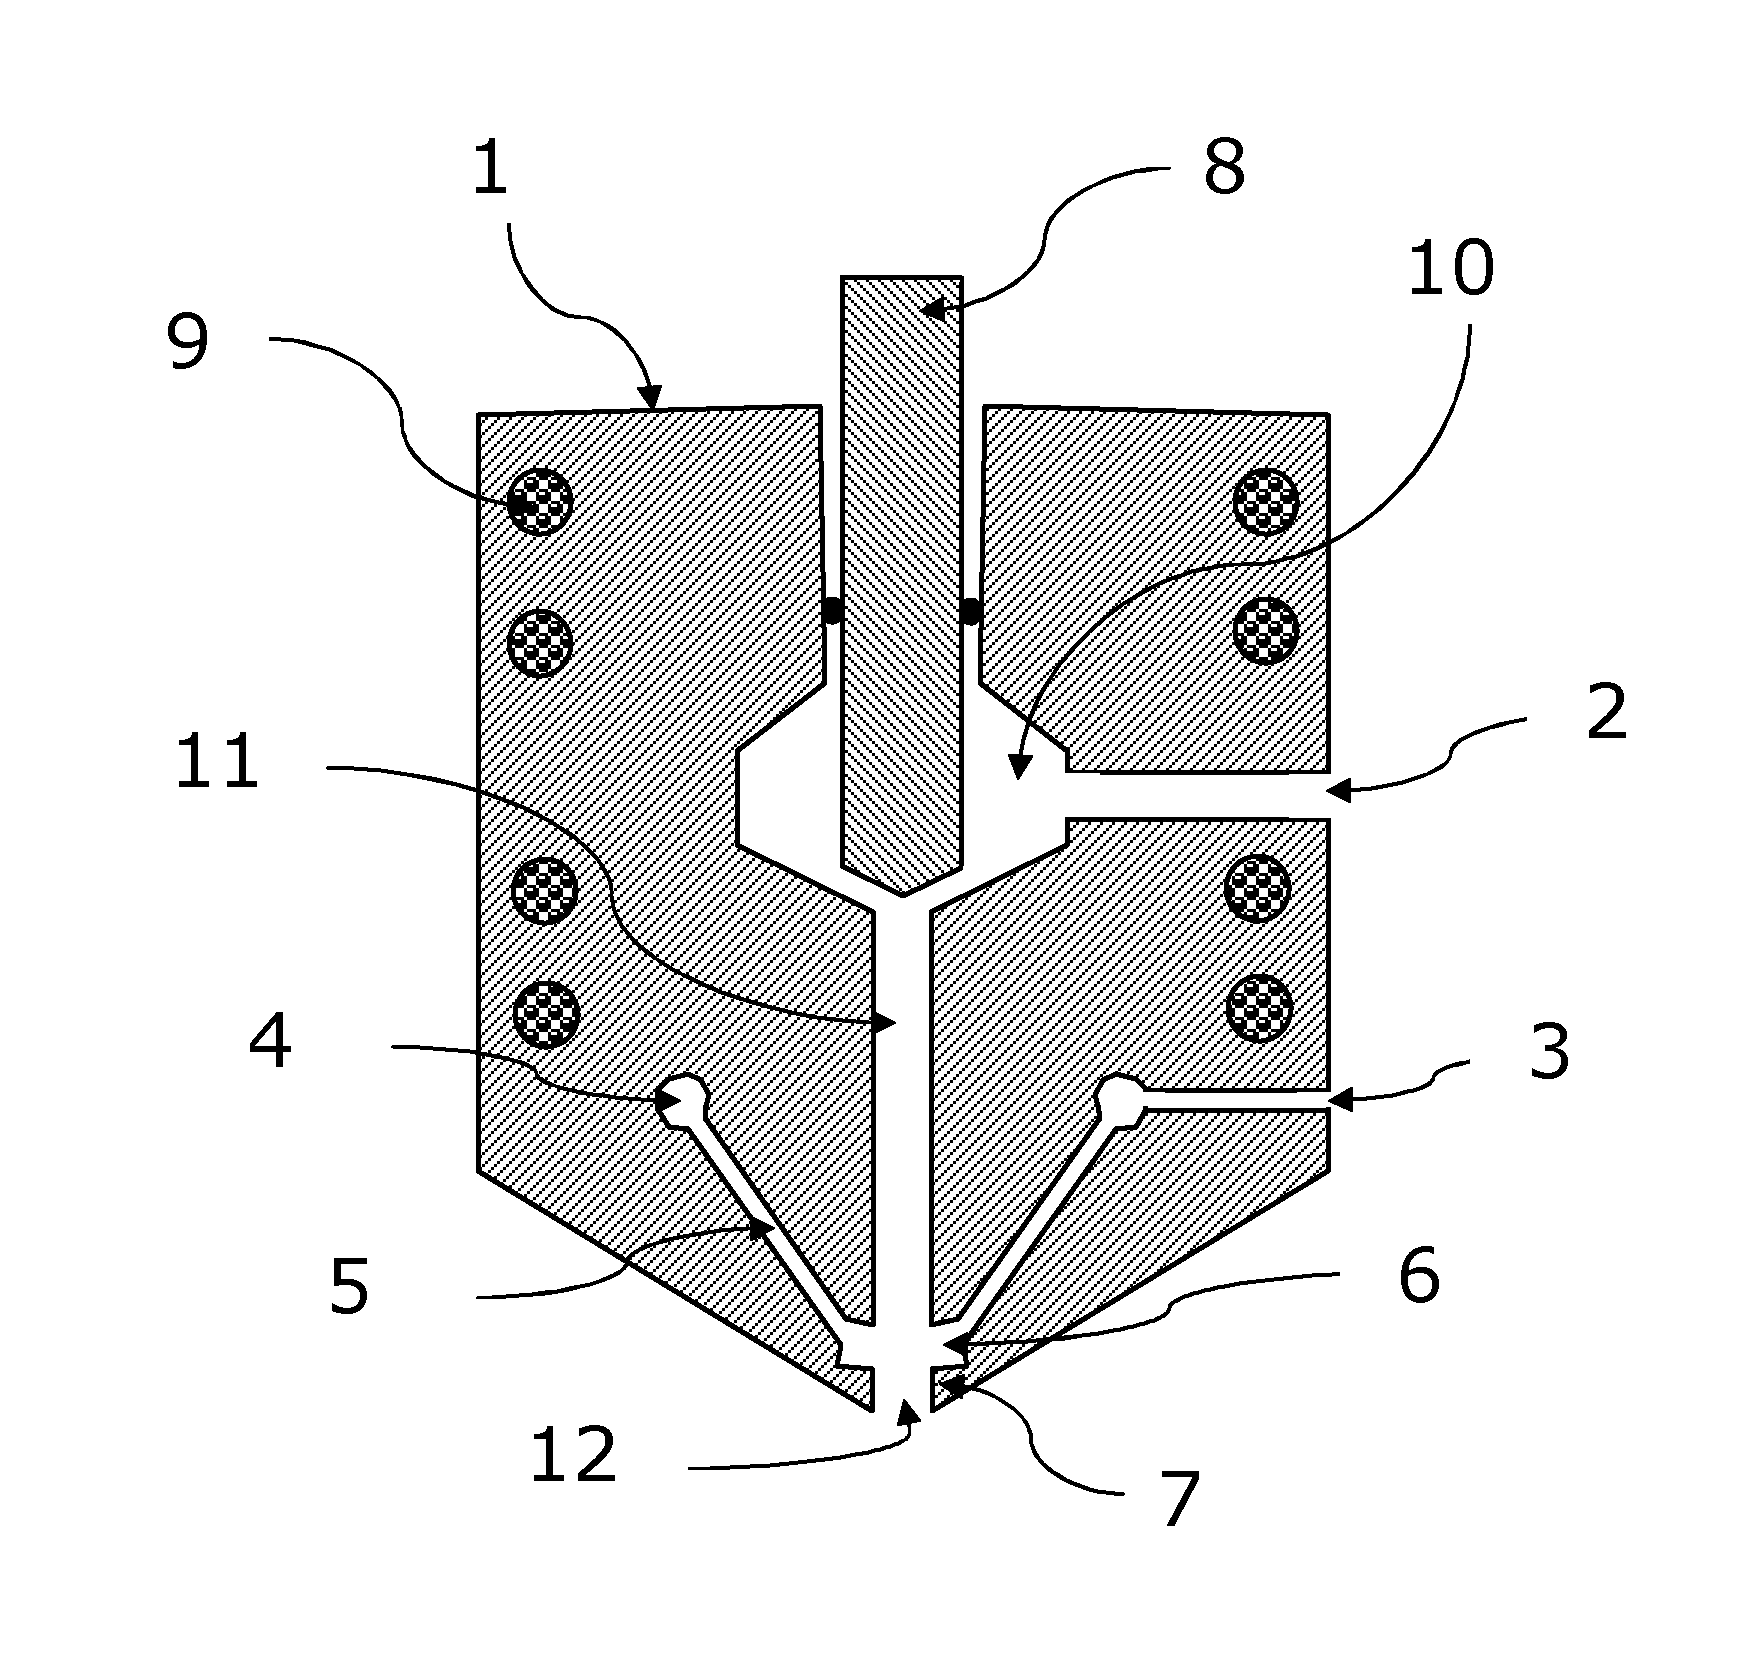 Equipment and method for frozen confectionery product with layered structure having external coating